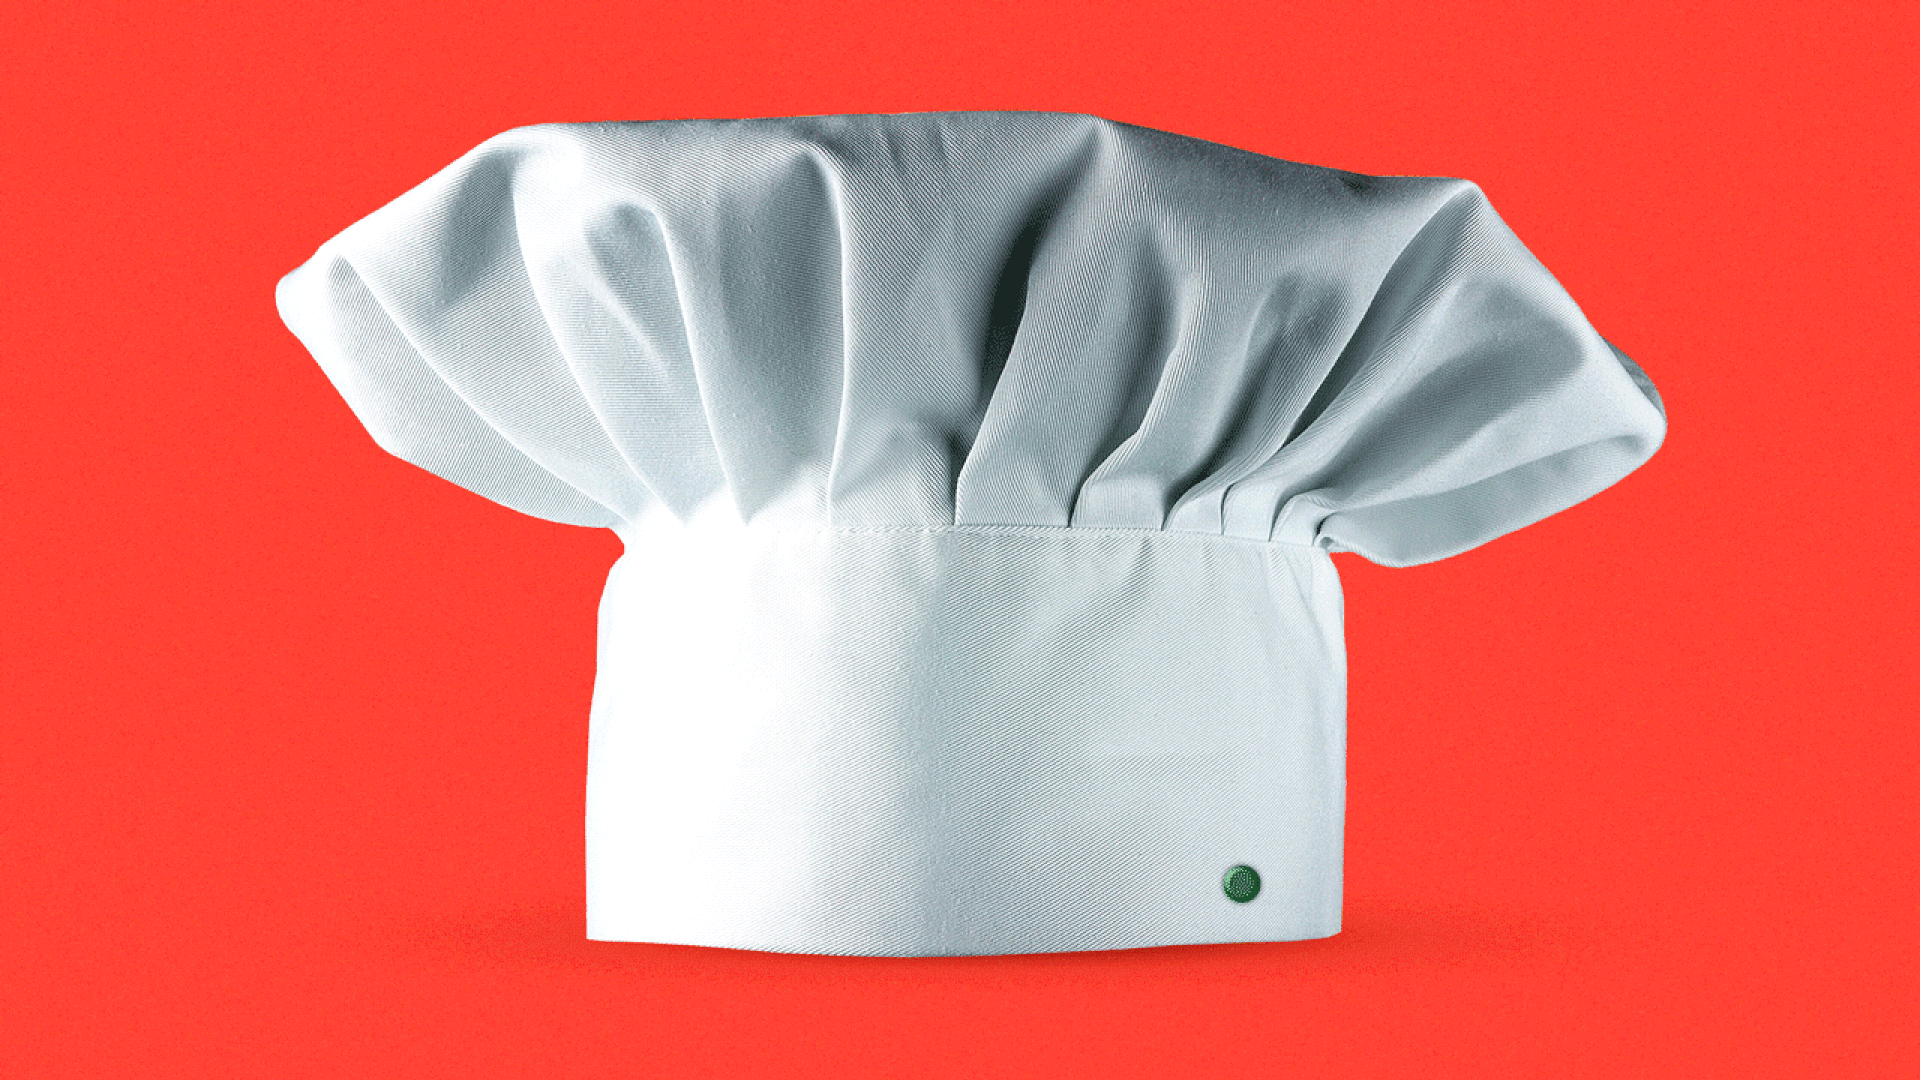 Animated illustration of a chef hat with a blinking green power light